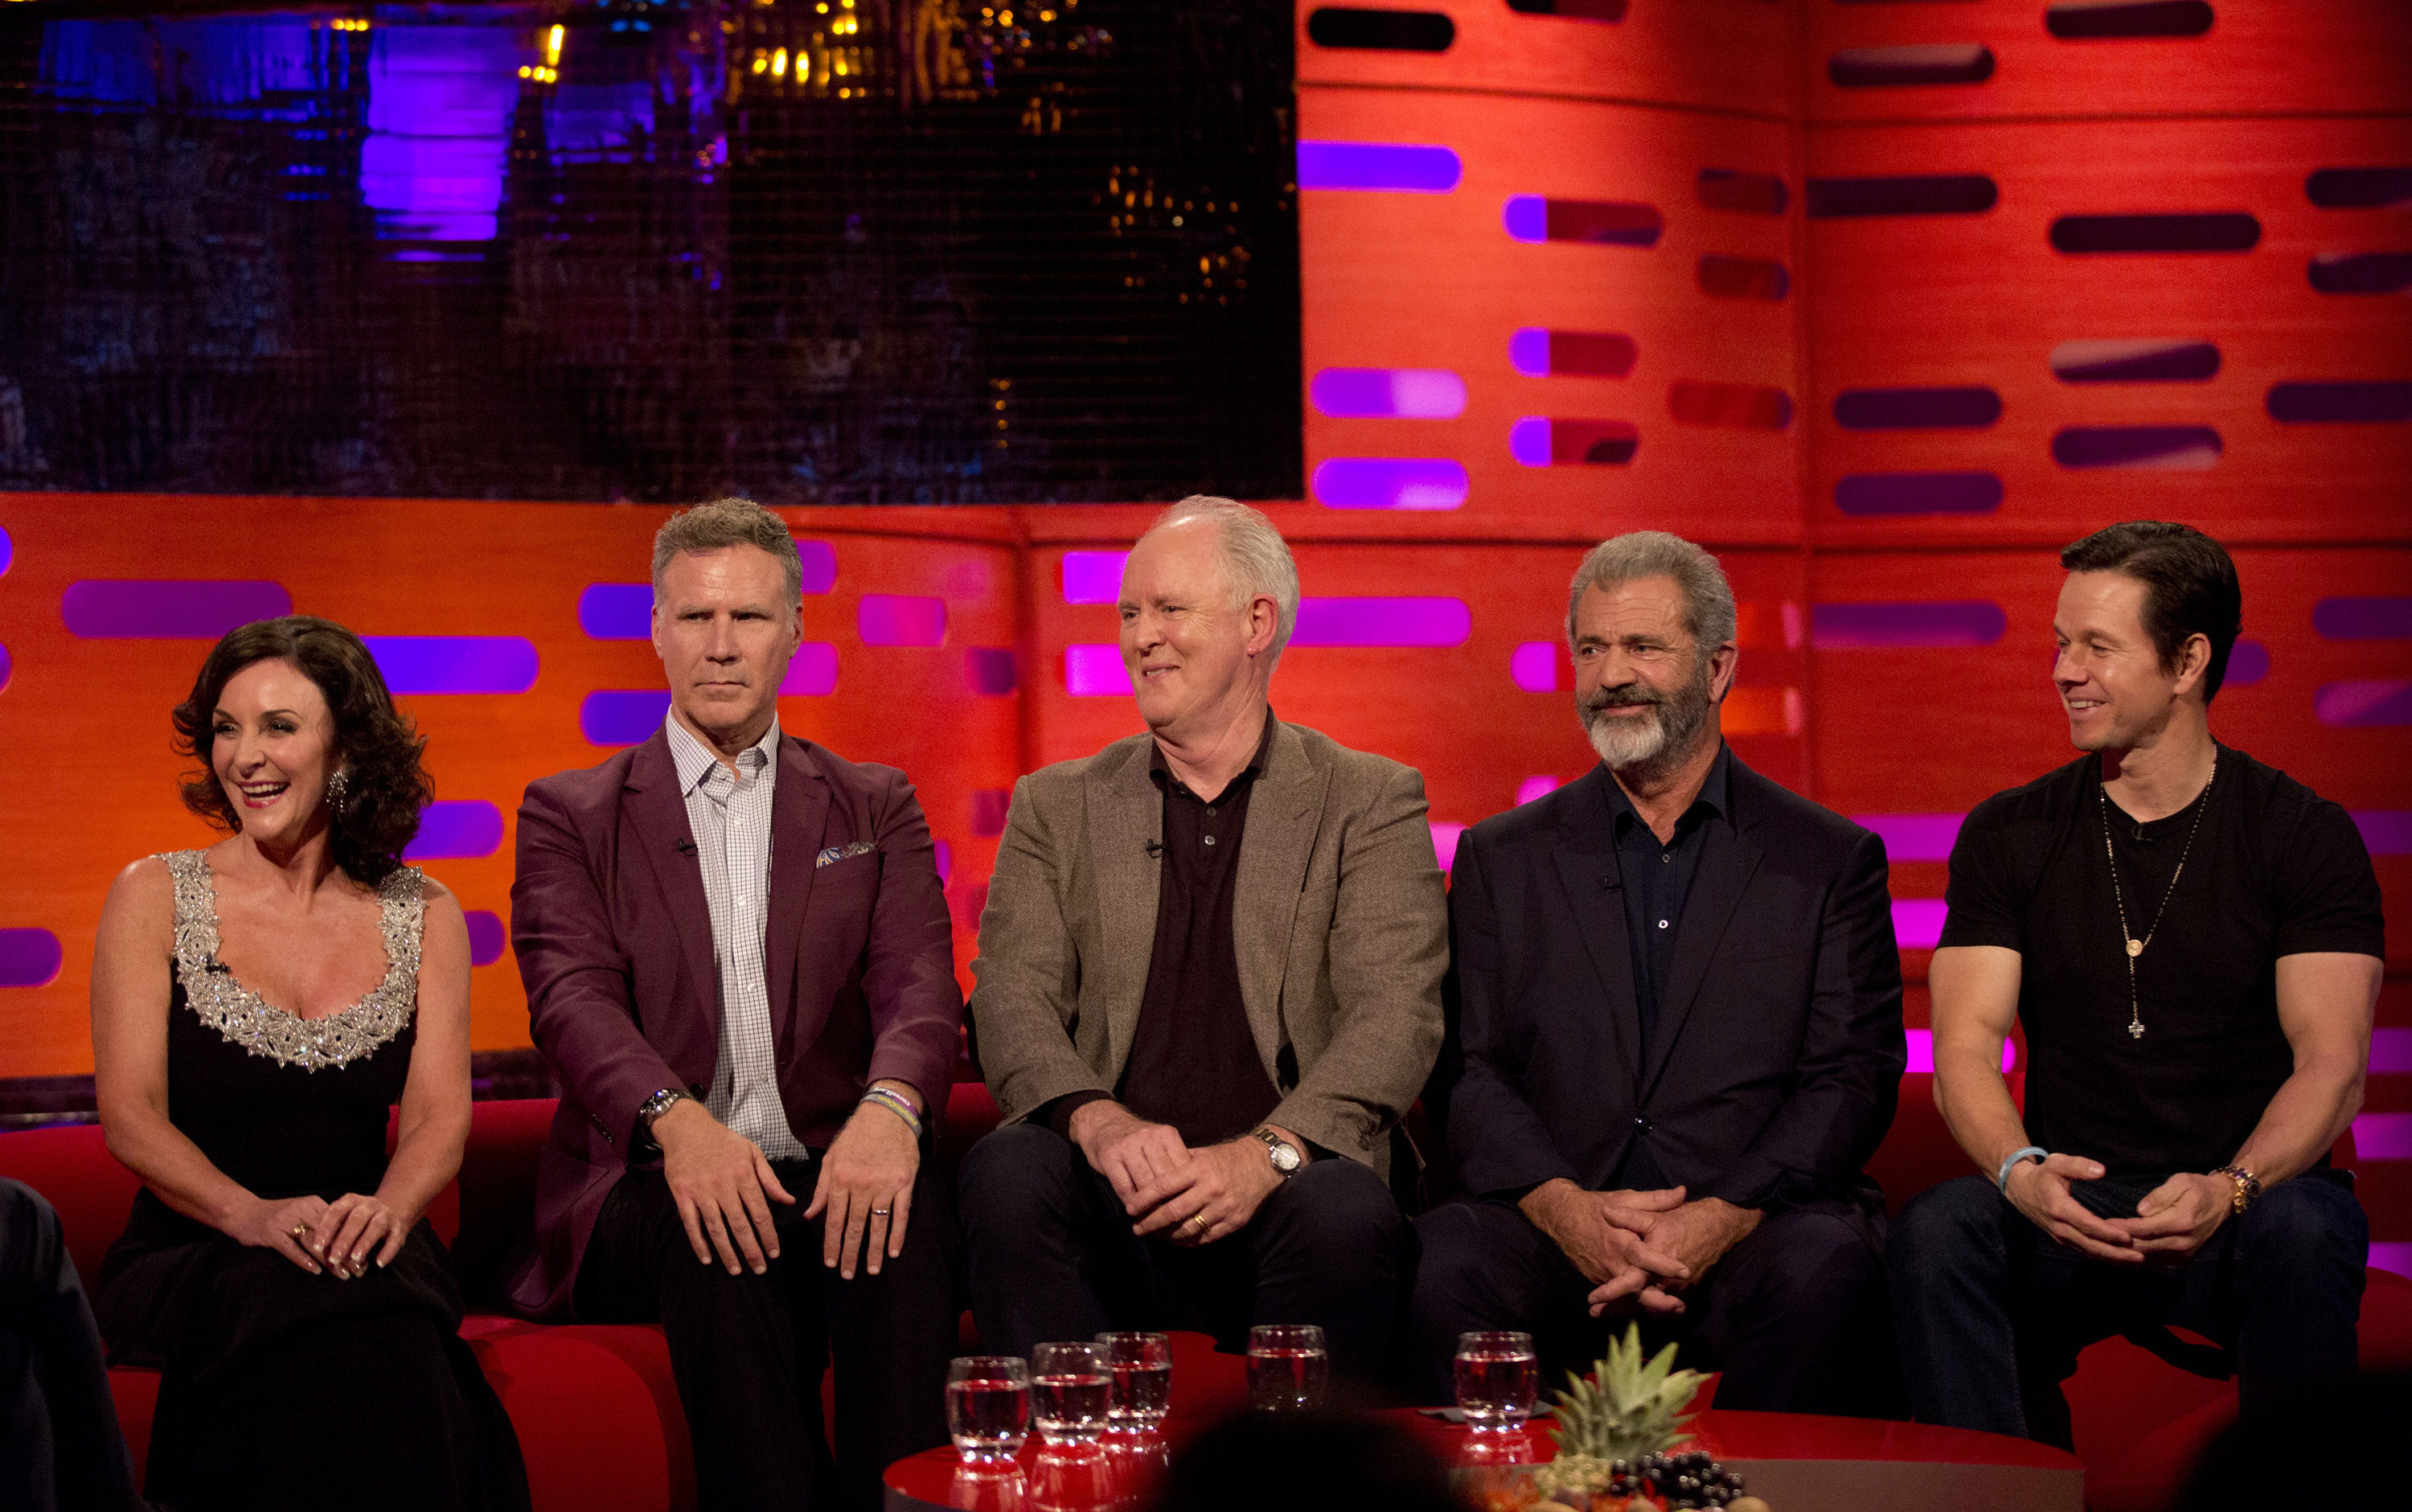 Shirley Ballas, Will Ferrell, John Lithgow, Mel Gibson, and Mark Wahlberg while filming The Graham Norton Show (Isabel Infantes/PA)